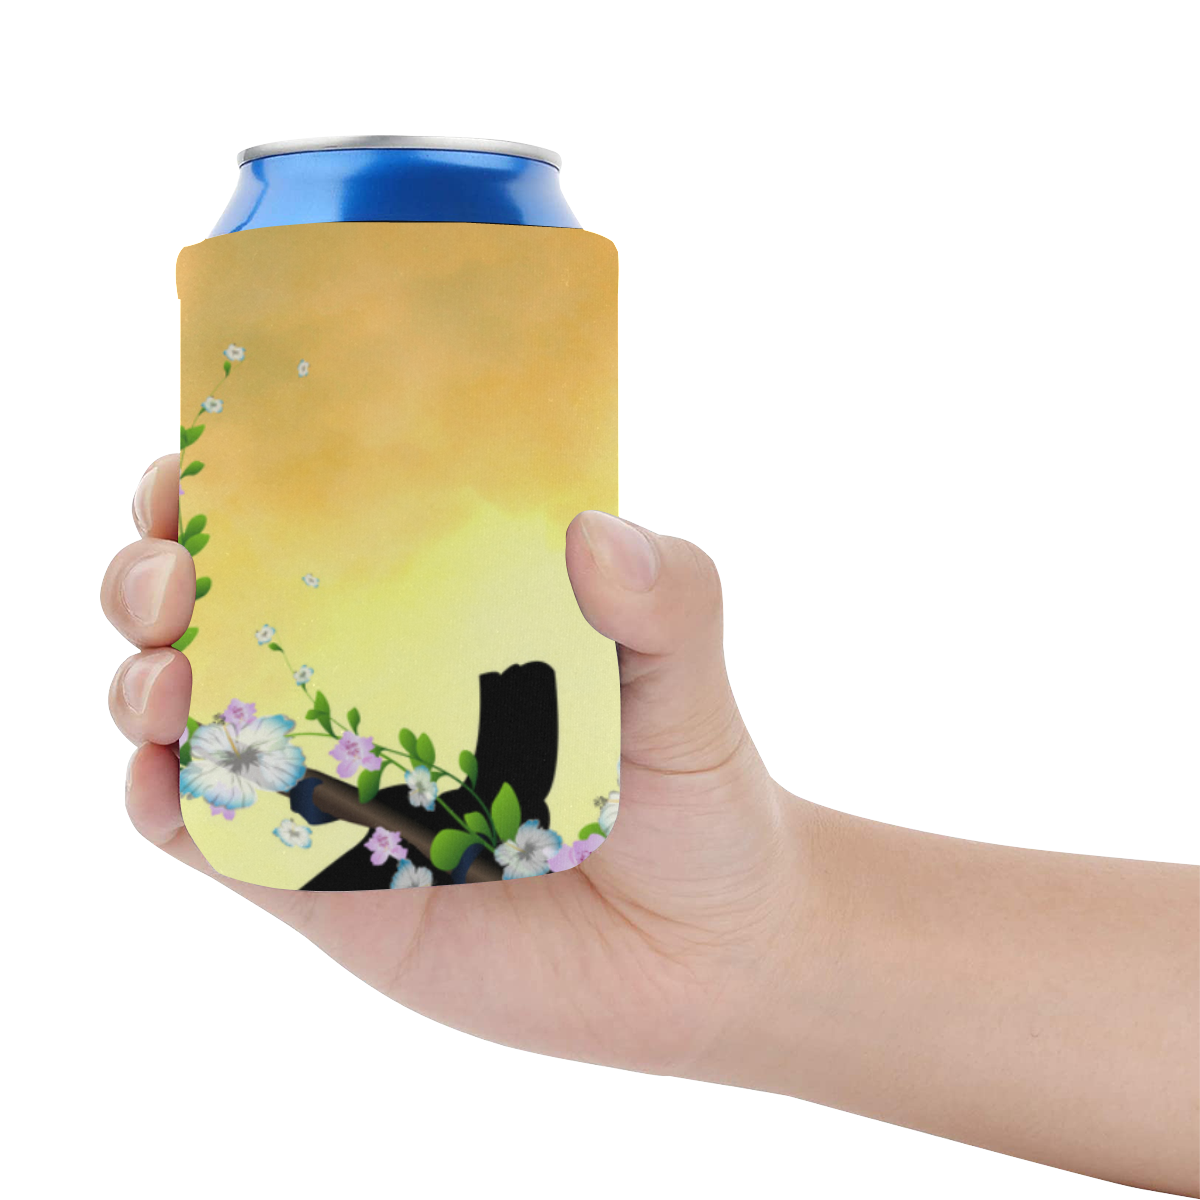 Toucan with flowers Neoprene Can Cooler 4" x 2.7" dia.